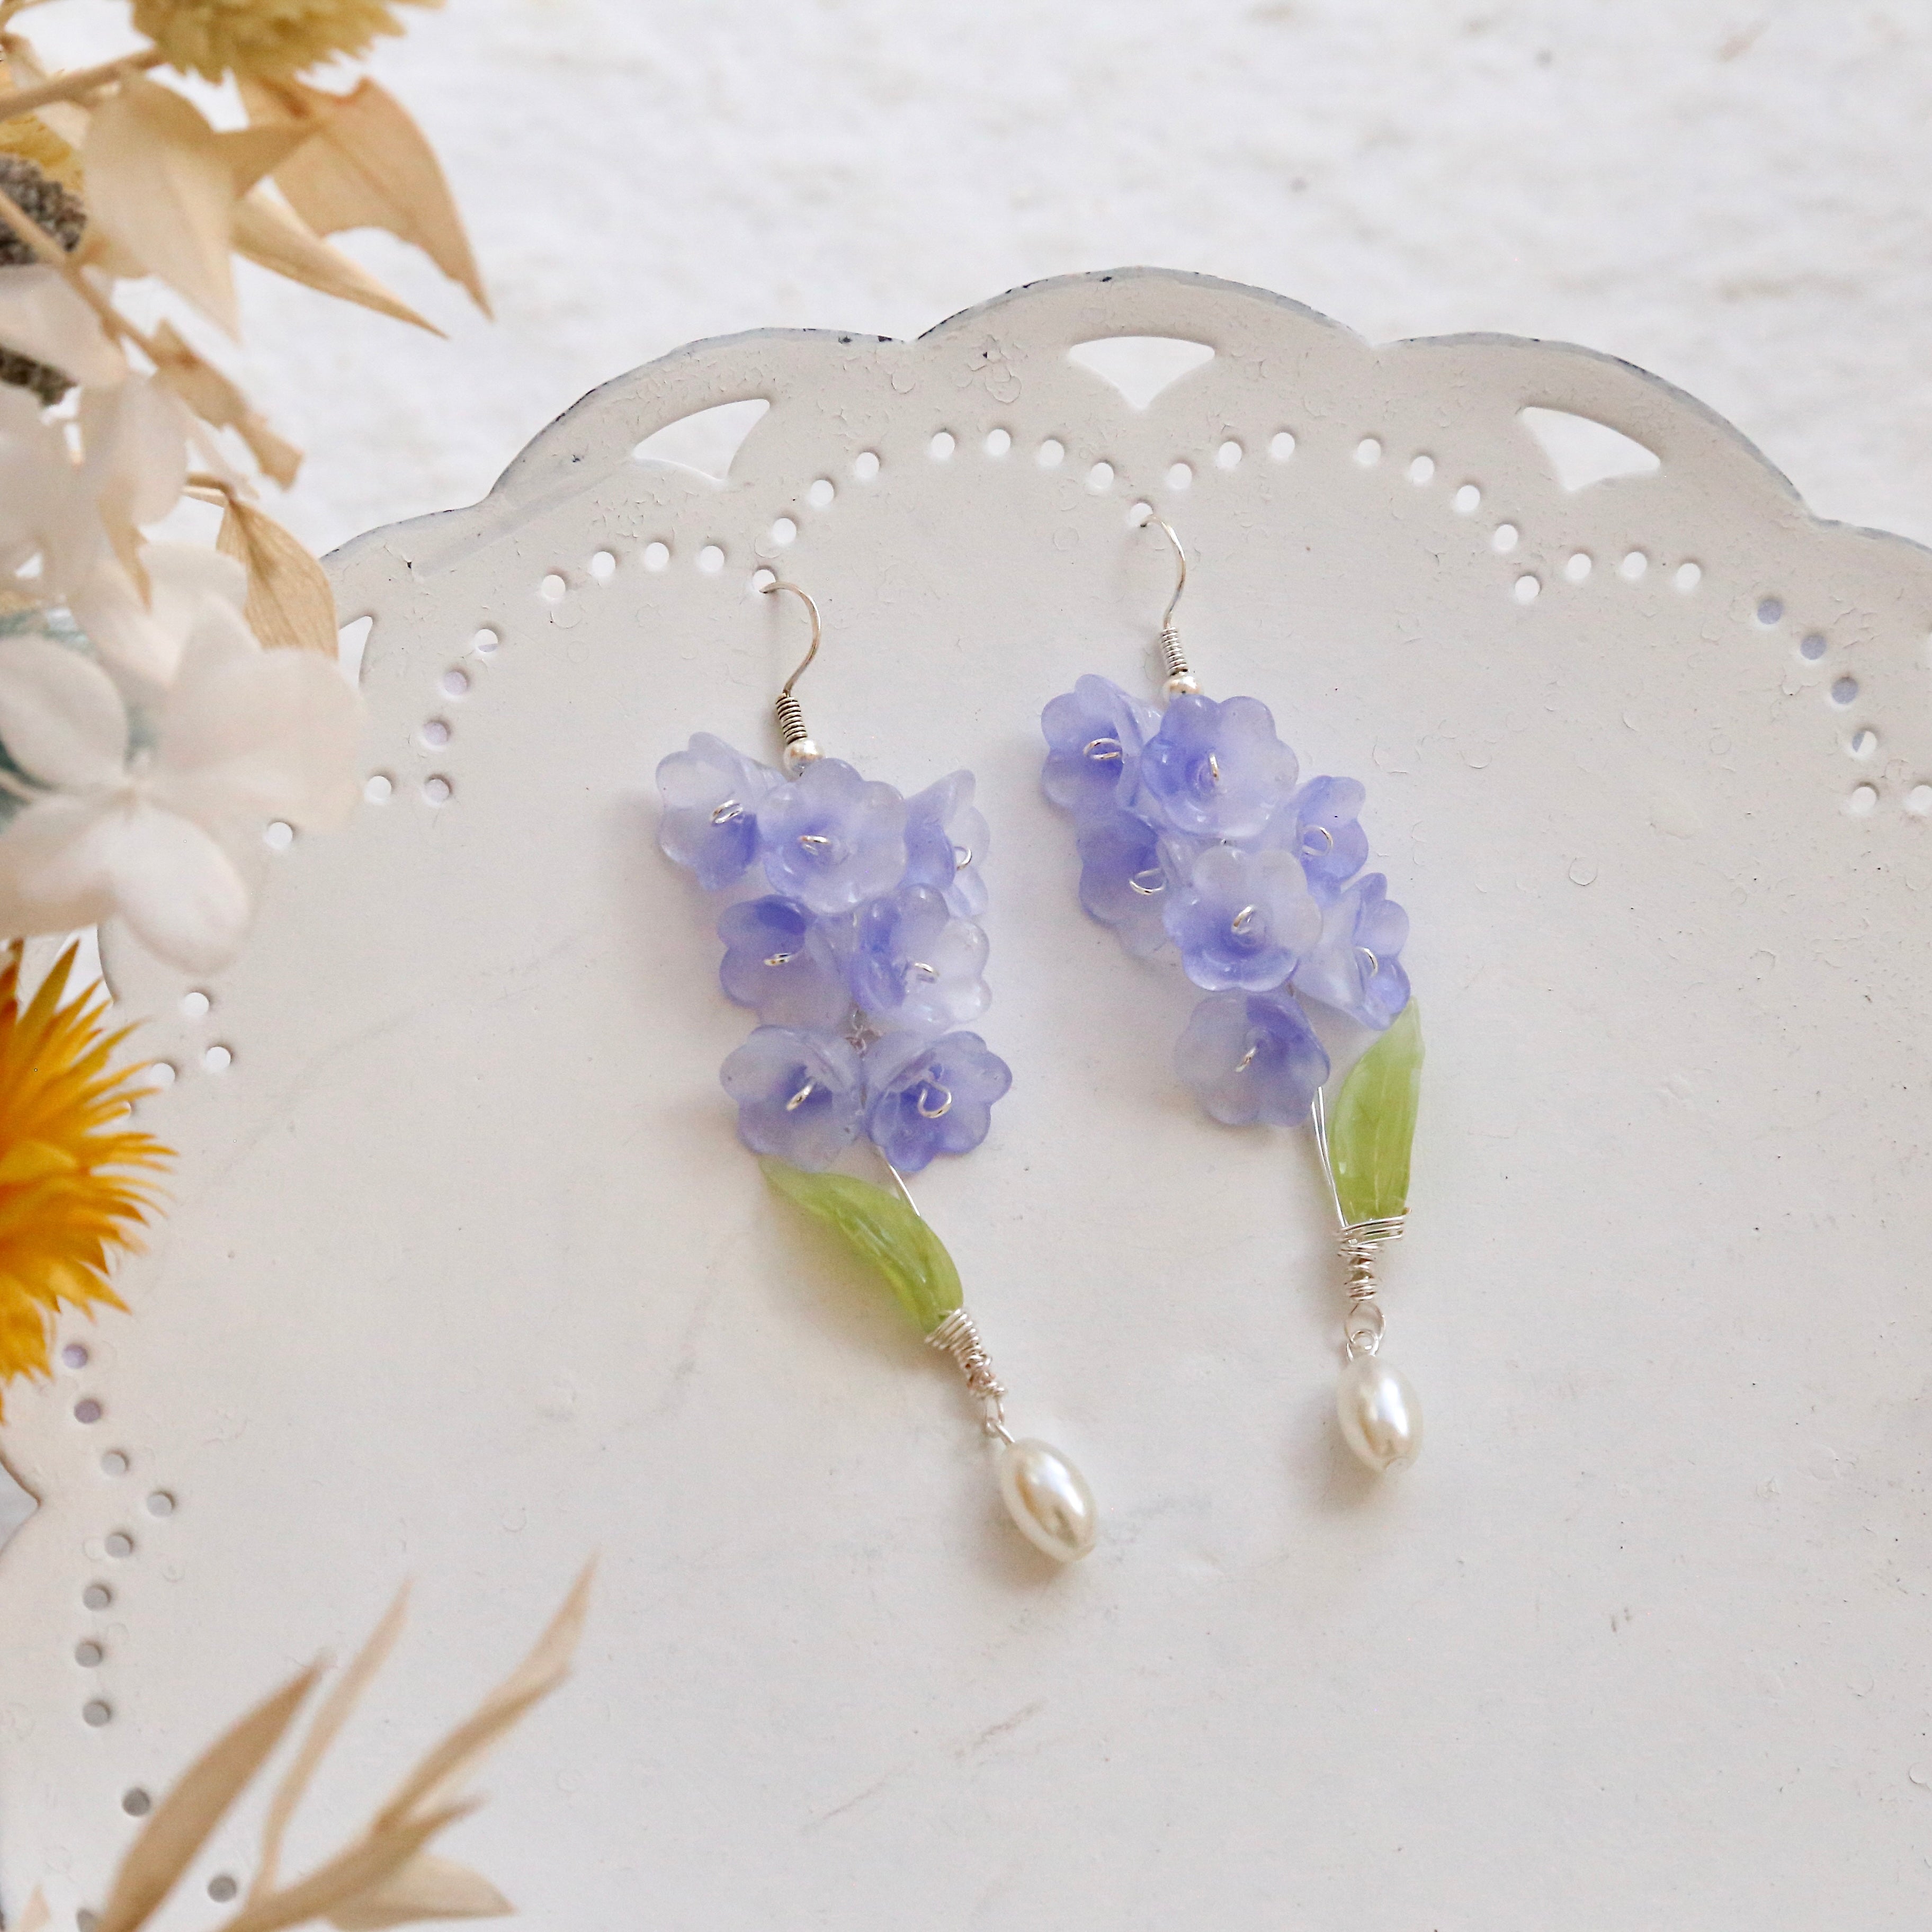 Latest Products 45.00 usd for Flower Shaped Earrings Boutiques